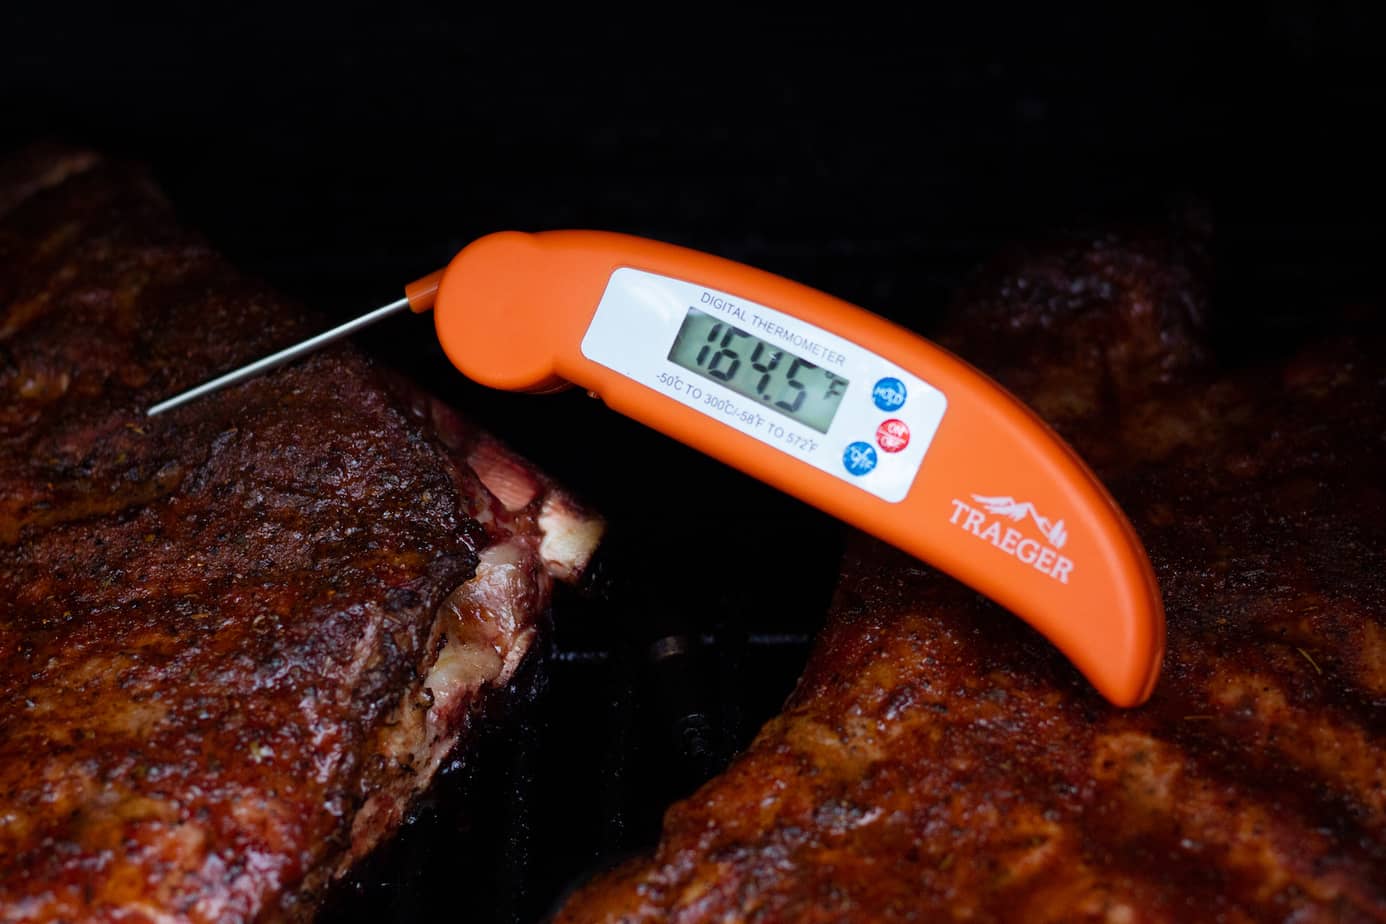 DIGITAL INSTANT-READ THERMOMETER